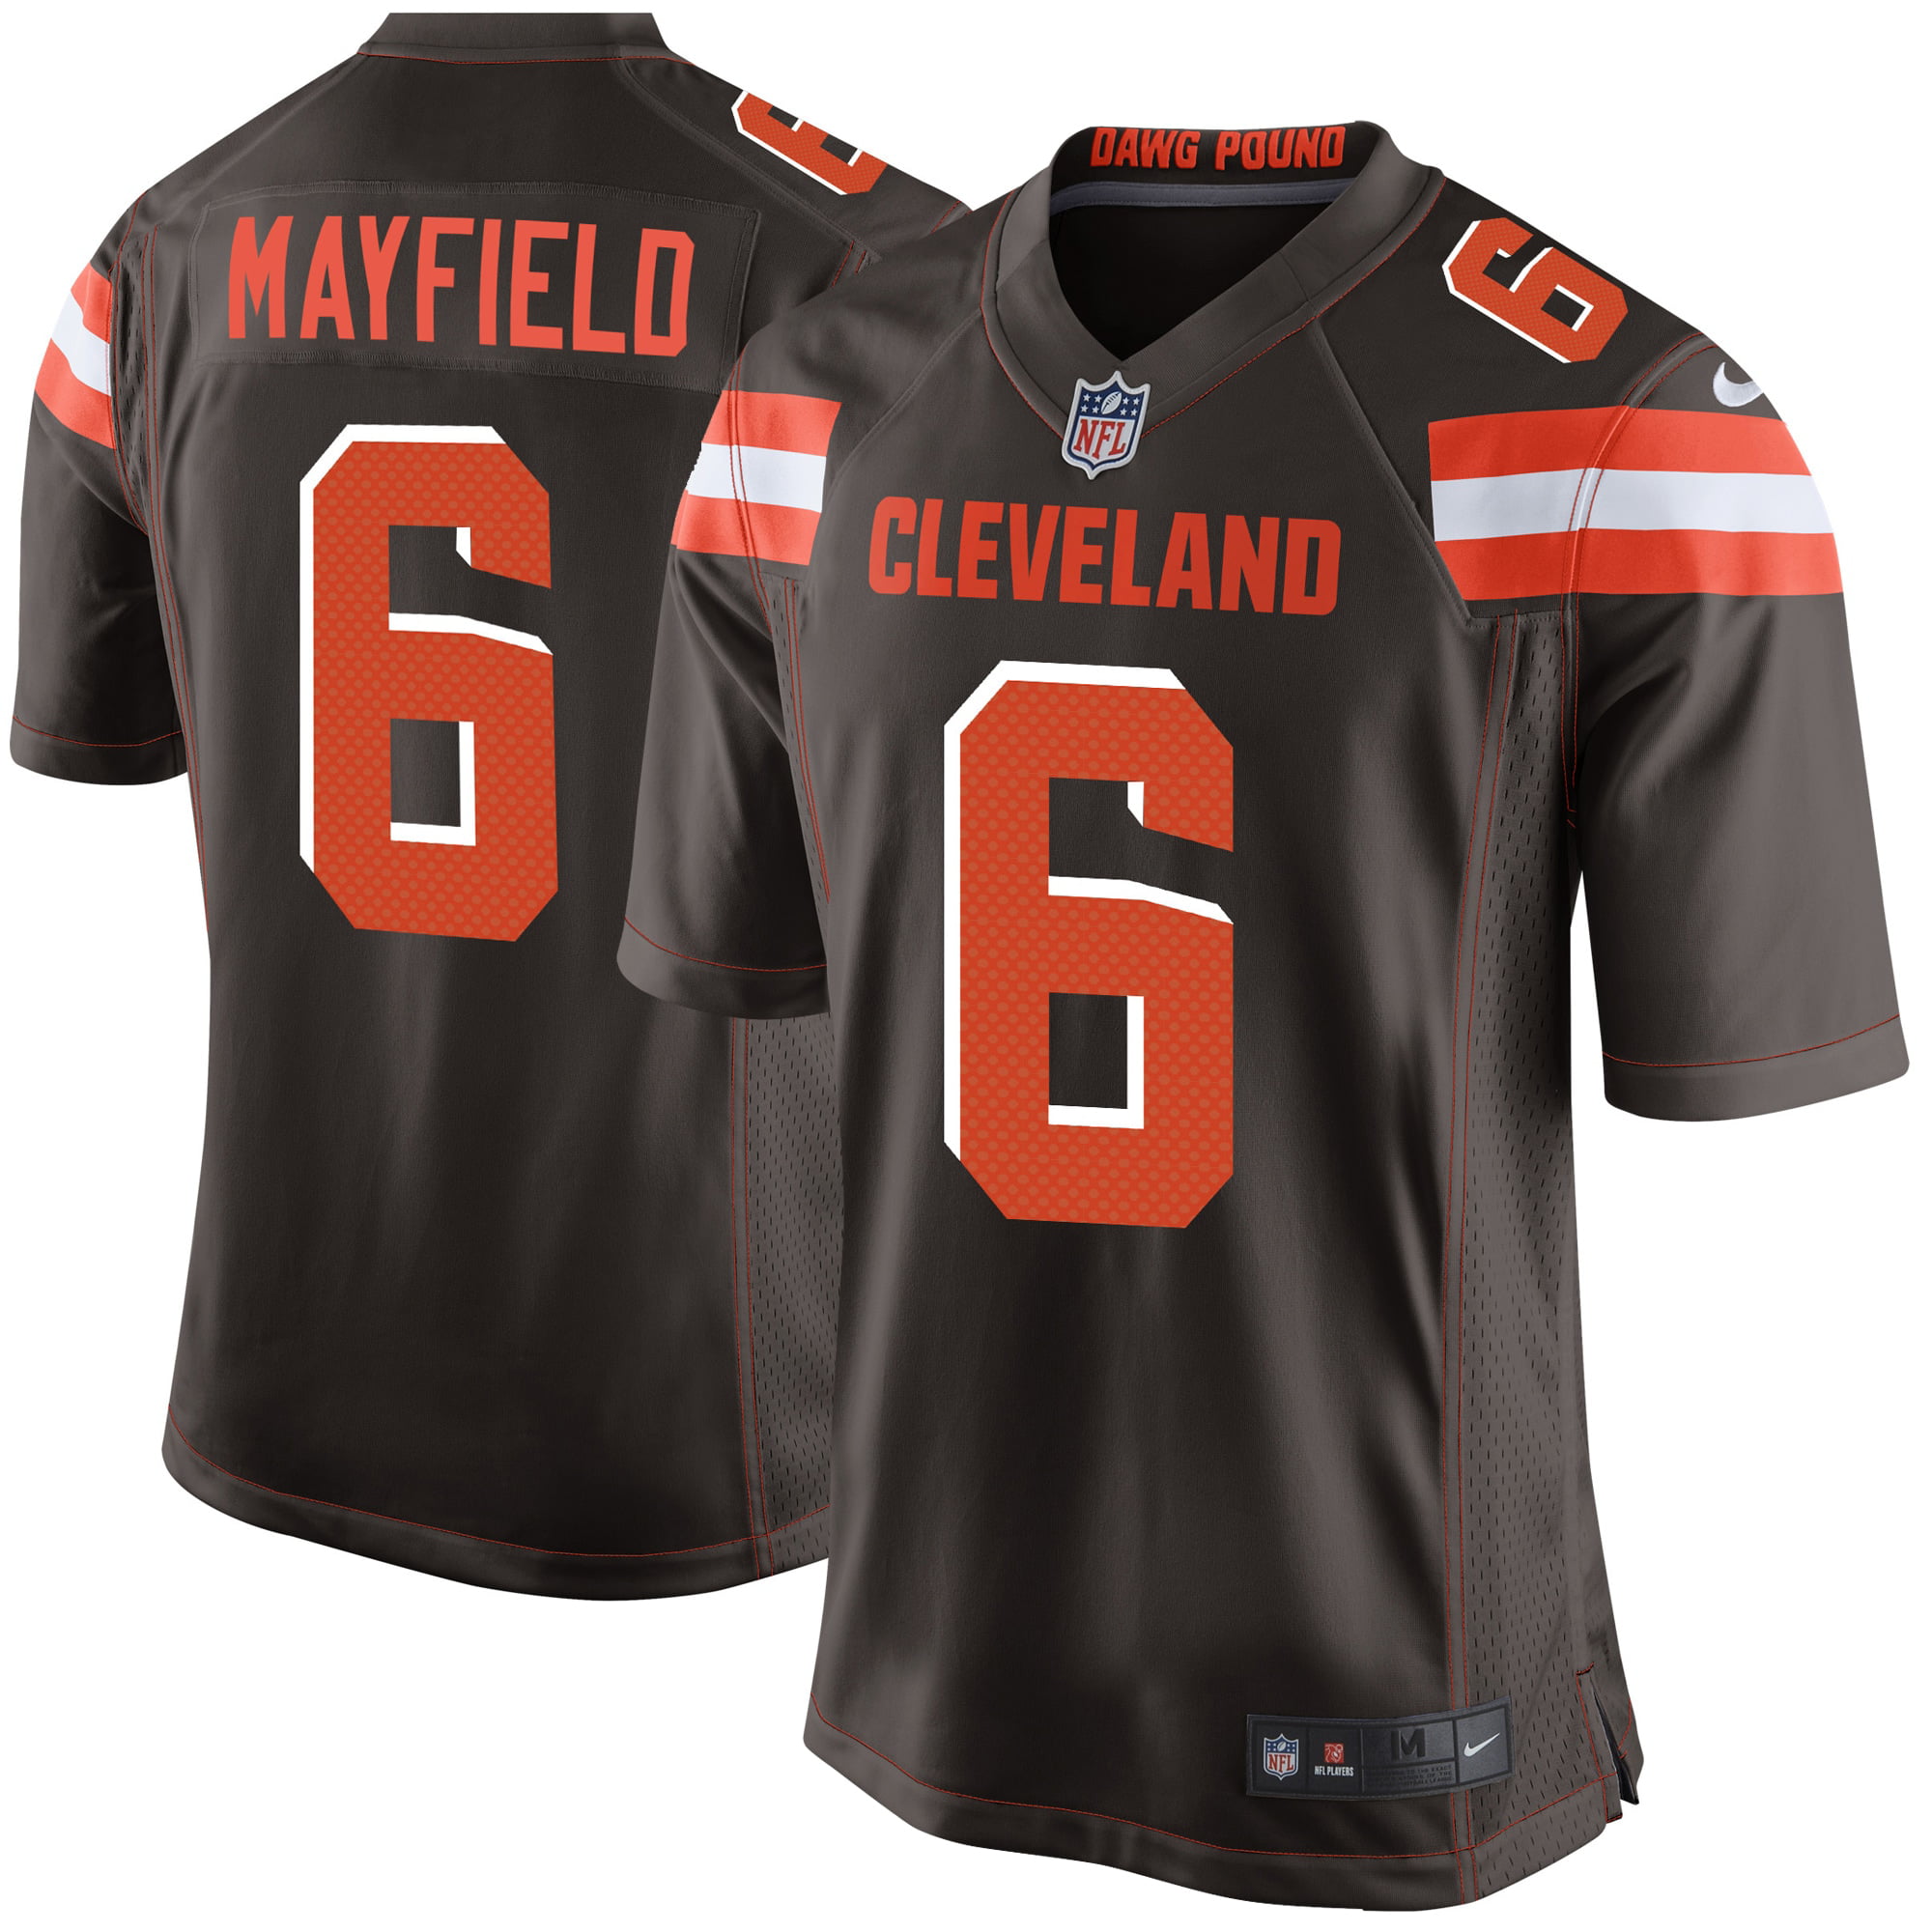 Baker Mayfield Cleveland Browns Nike Youth Game Jersey - Brown ...